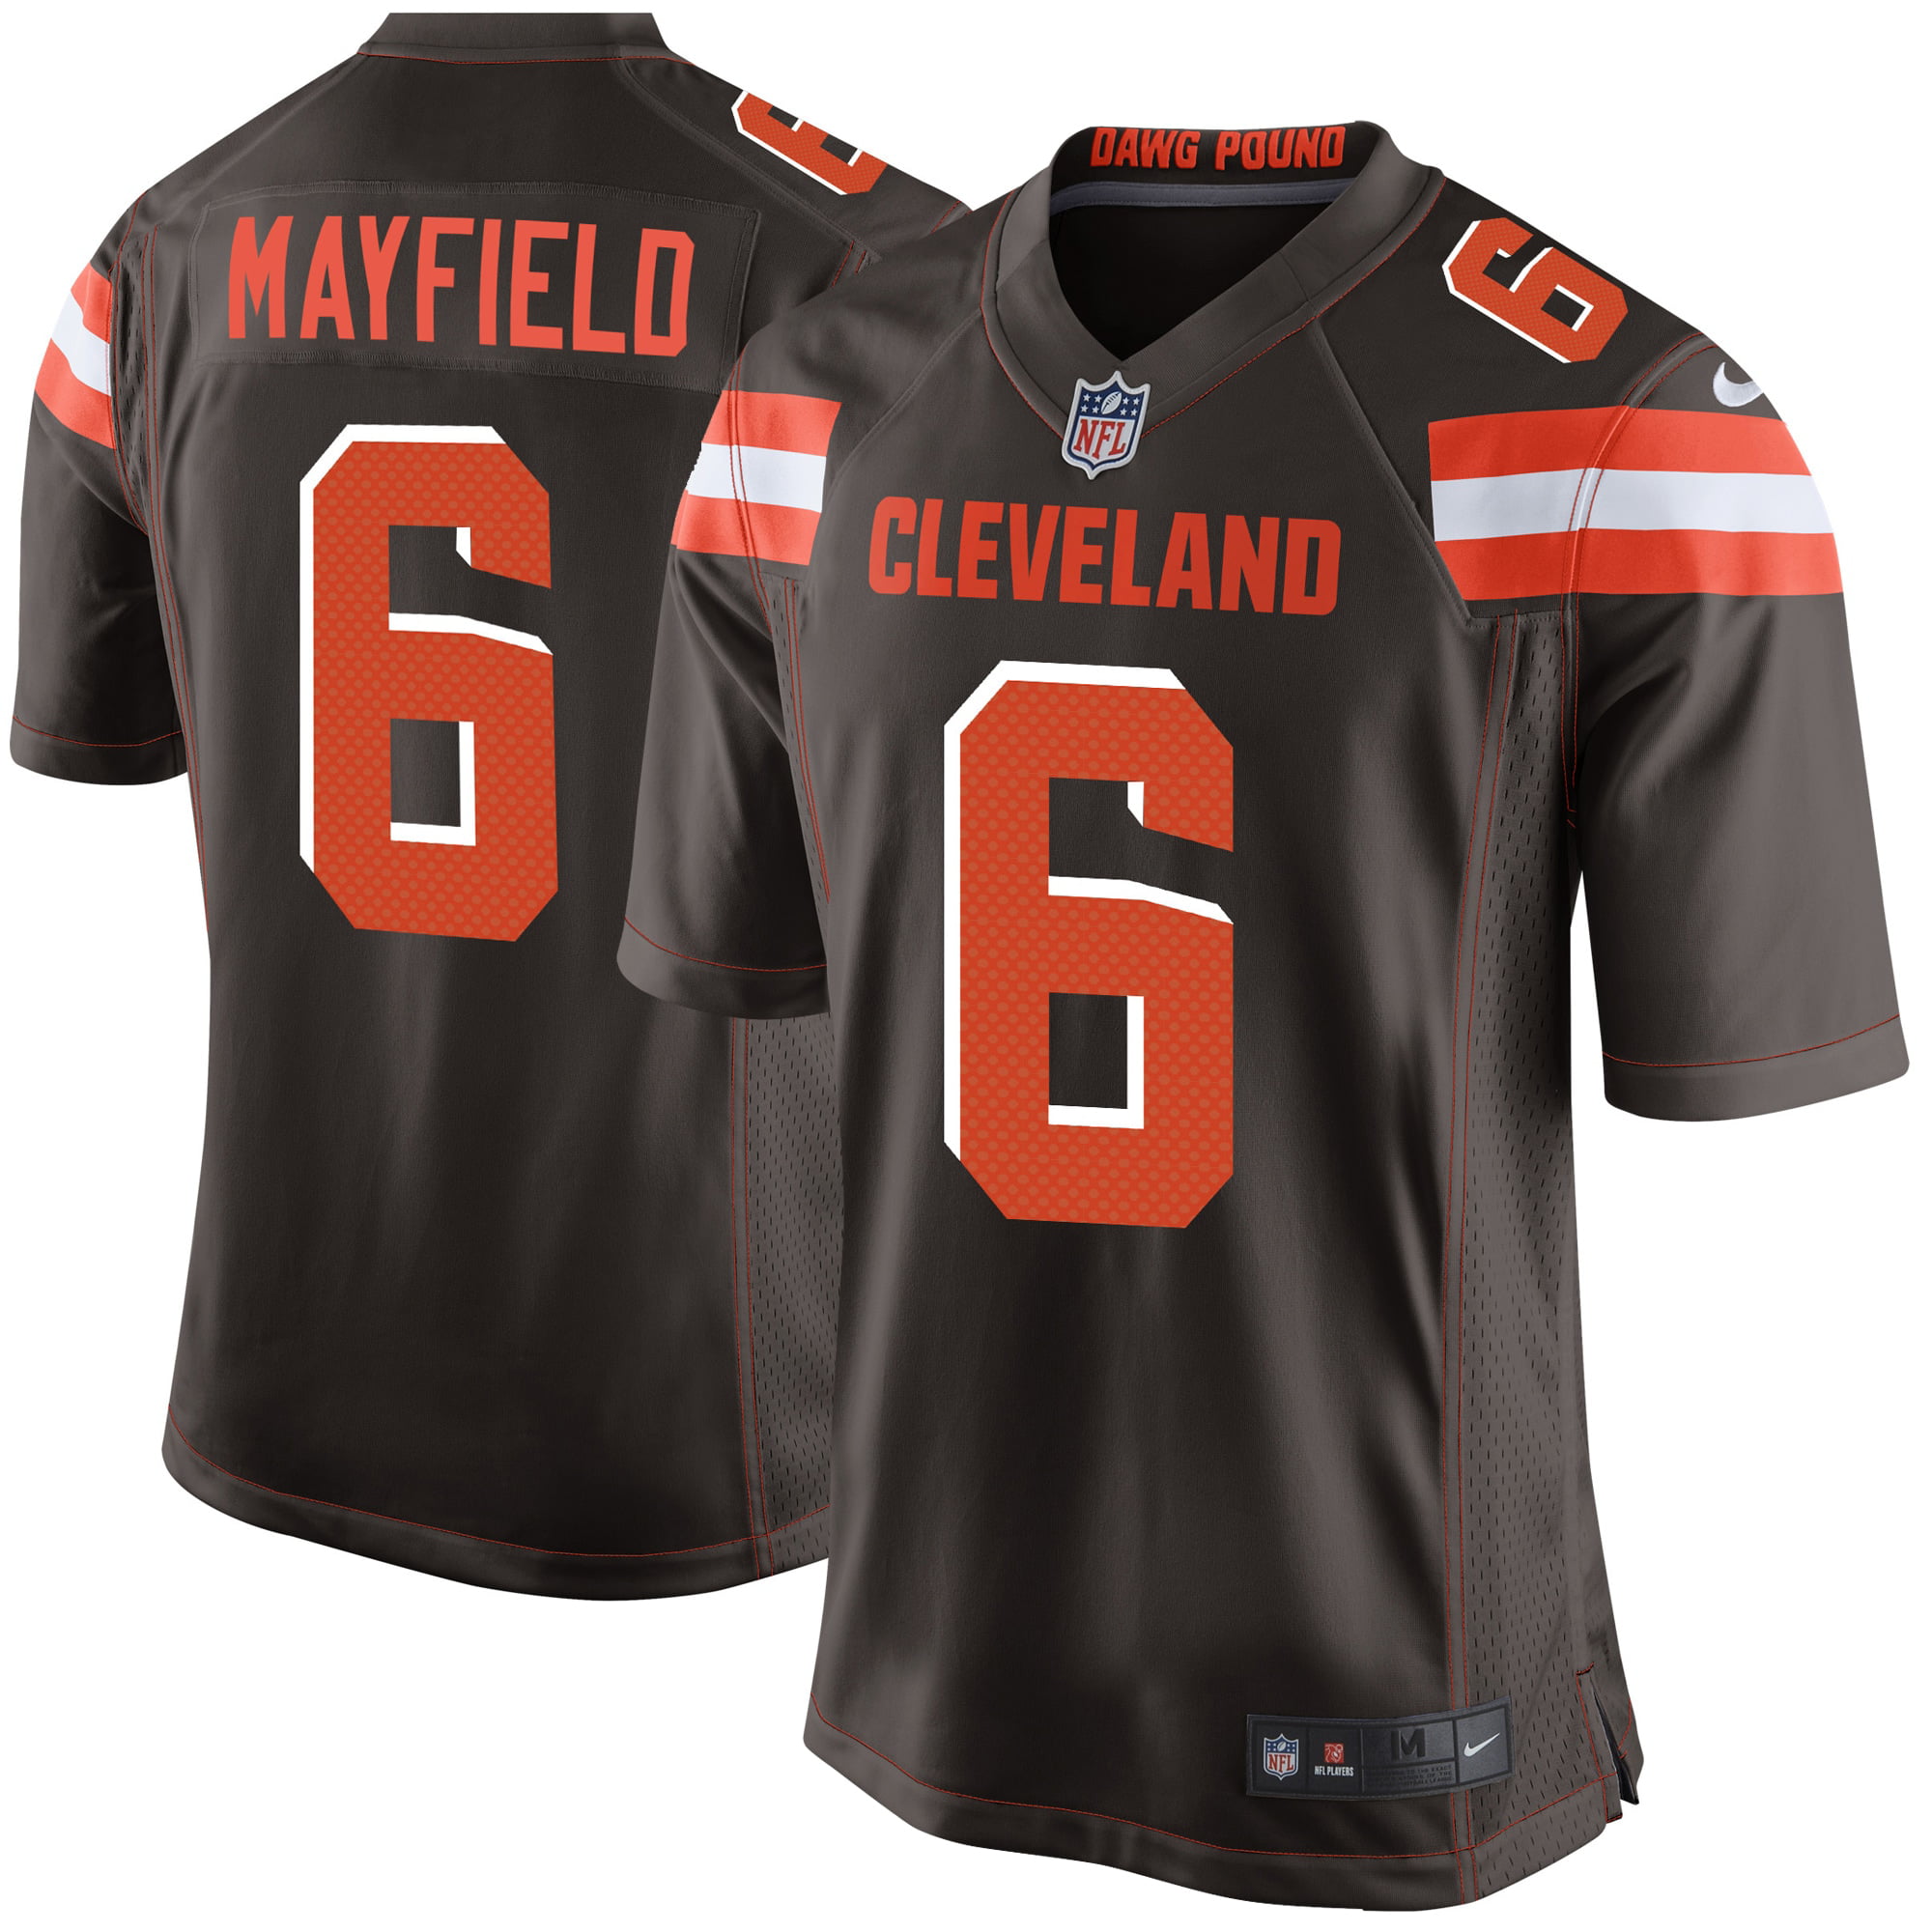 Baker Mayfield Cleveland Browns Nike Youth Game Jersey - Brown ...